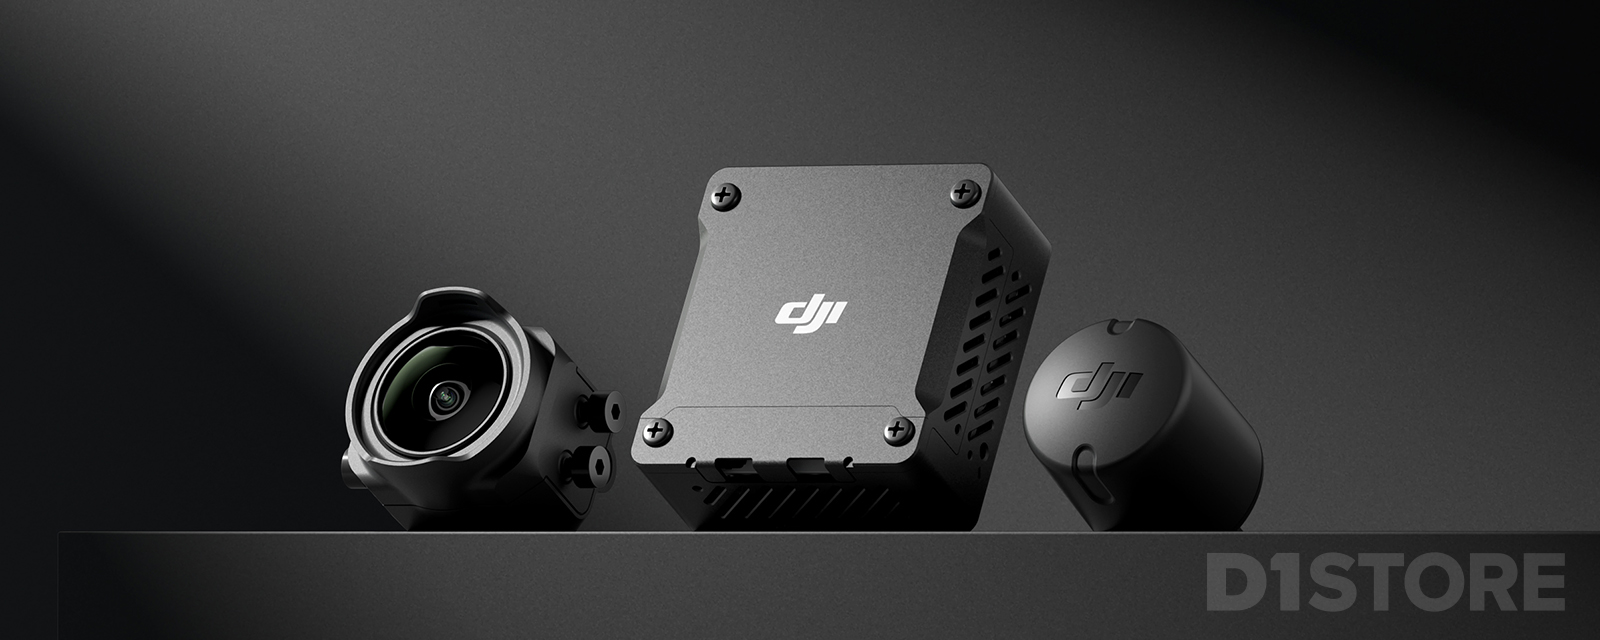 DJI O3 Air Unit - Ready and Reliable | Best Price Guarantee at D1 Store Australia